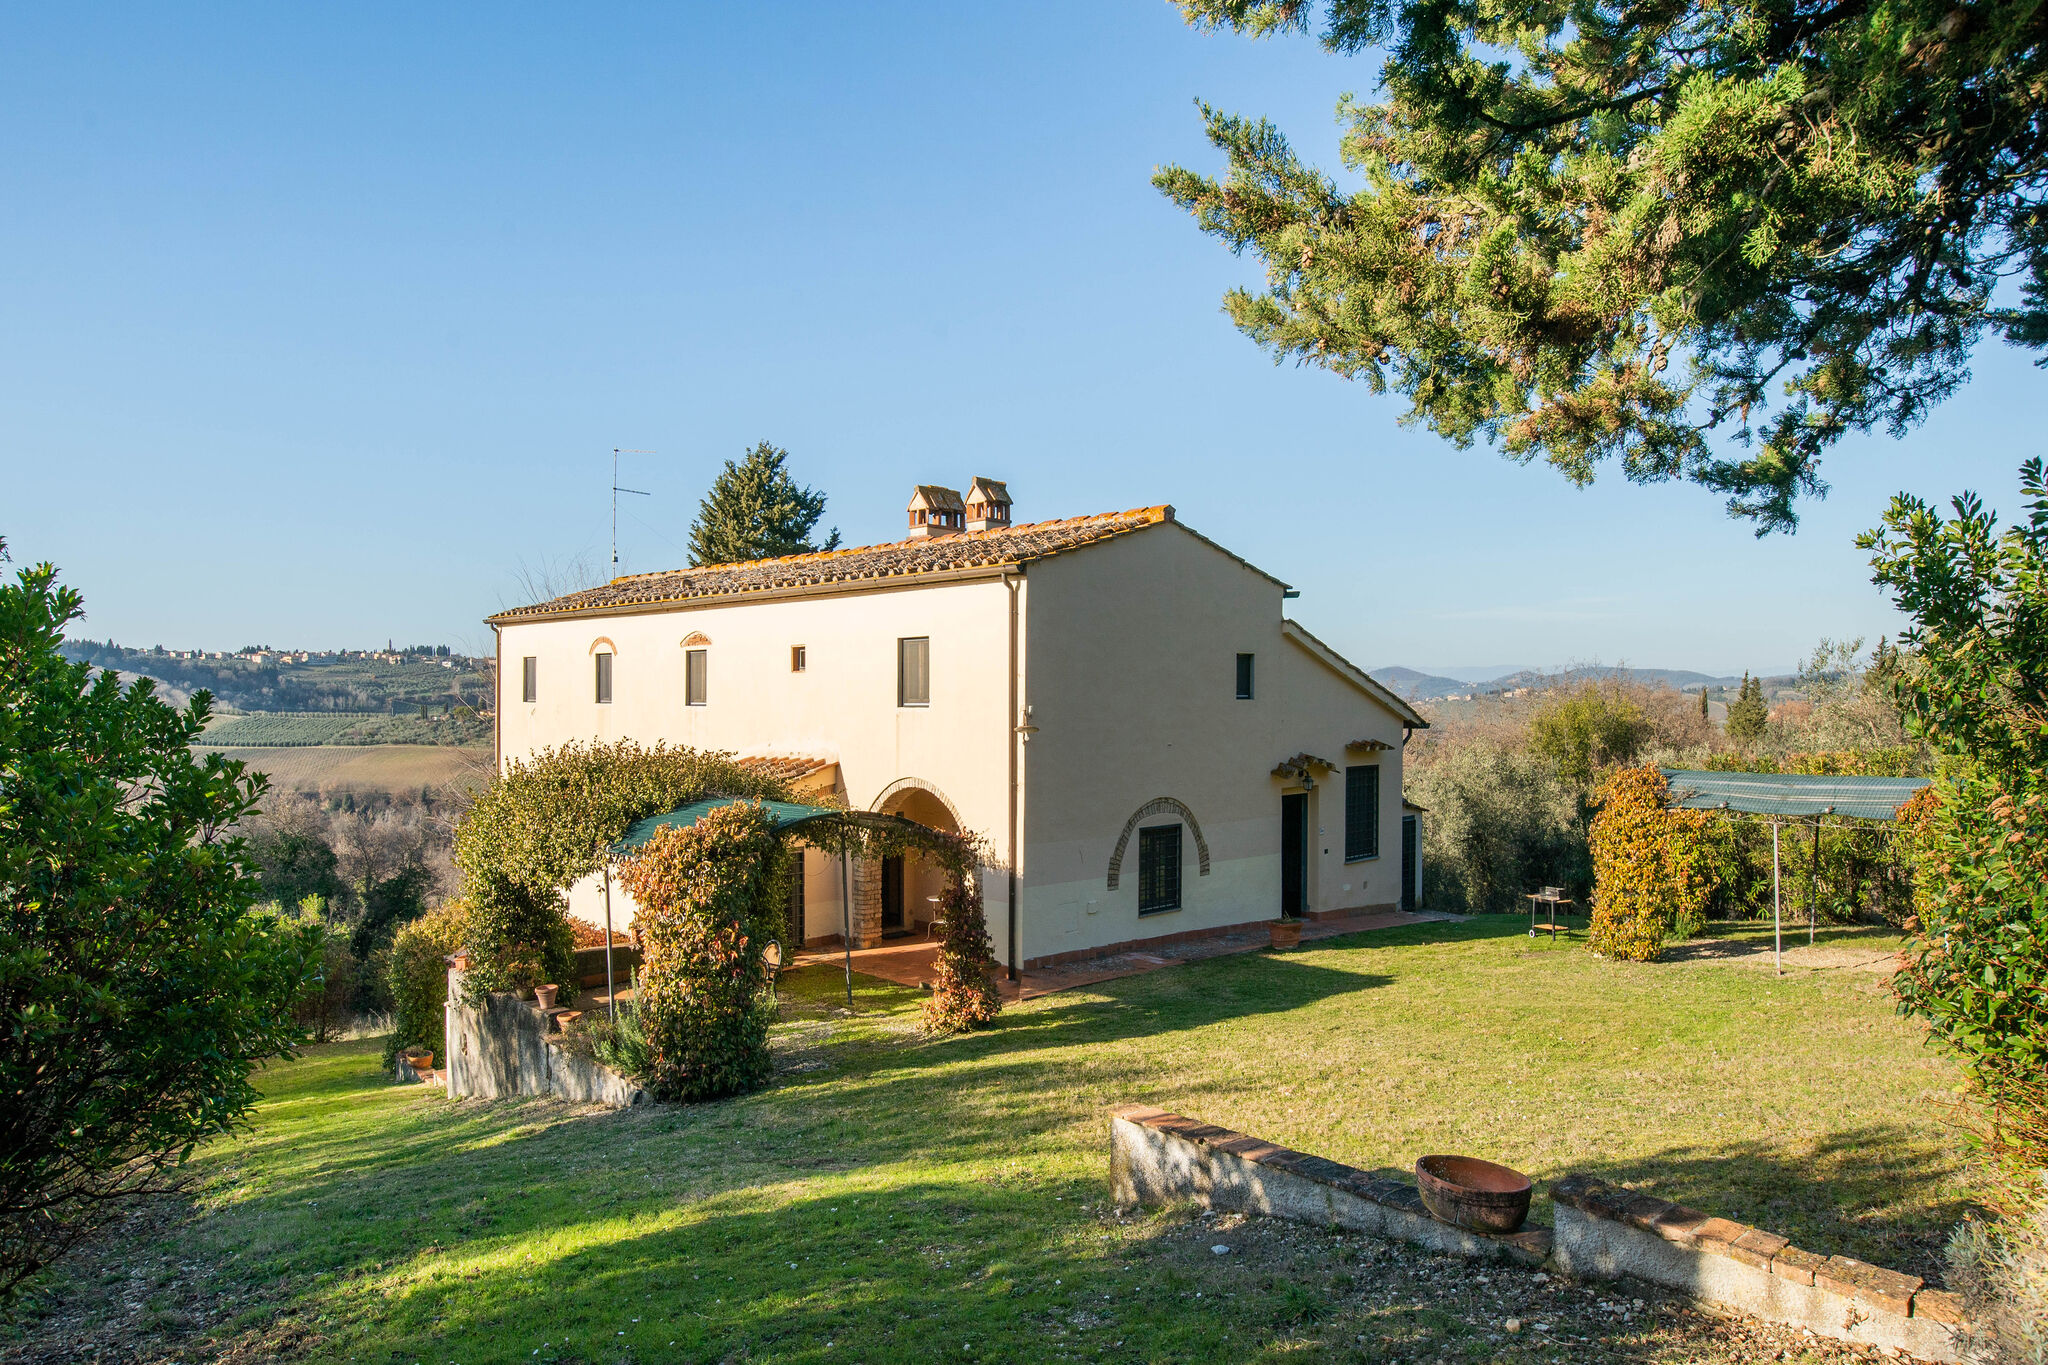 Alluring Villa in Tuscany Hills with Barbecue